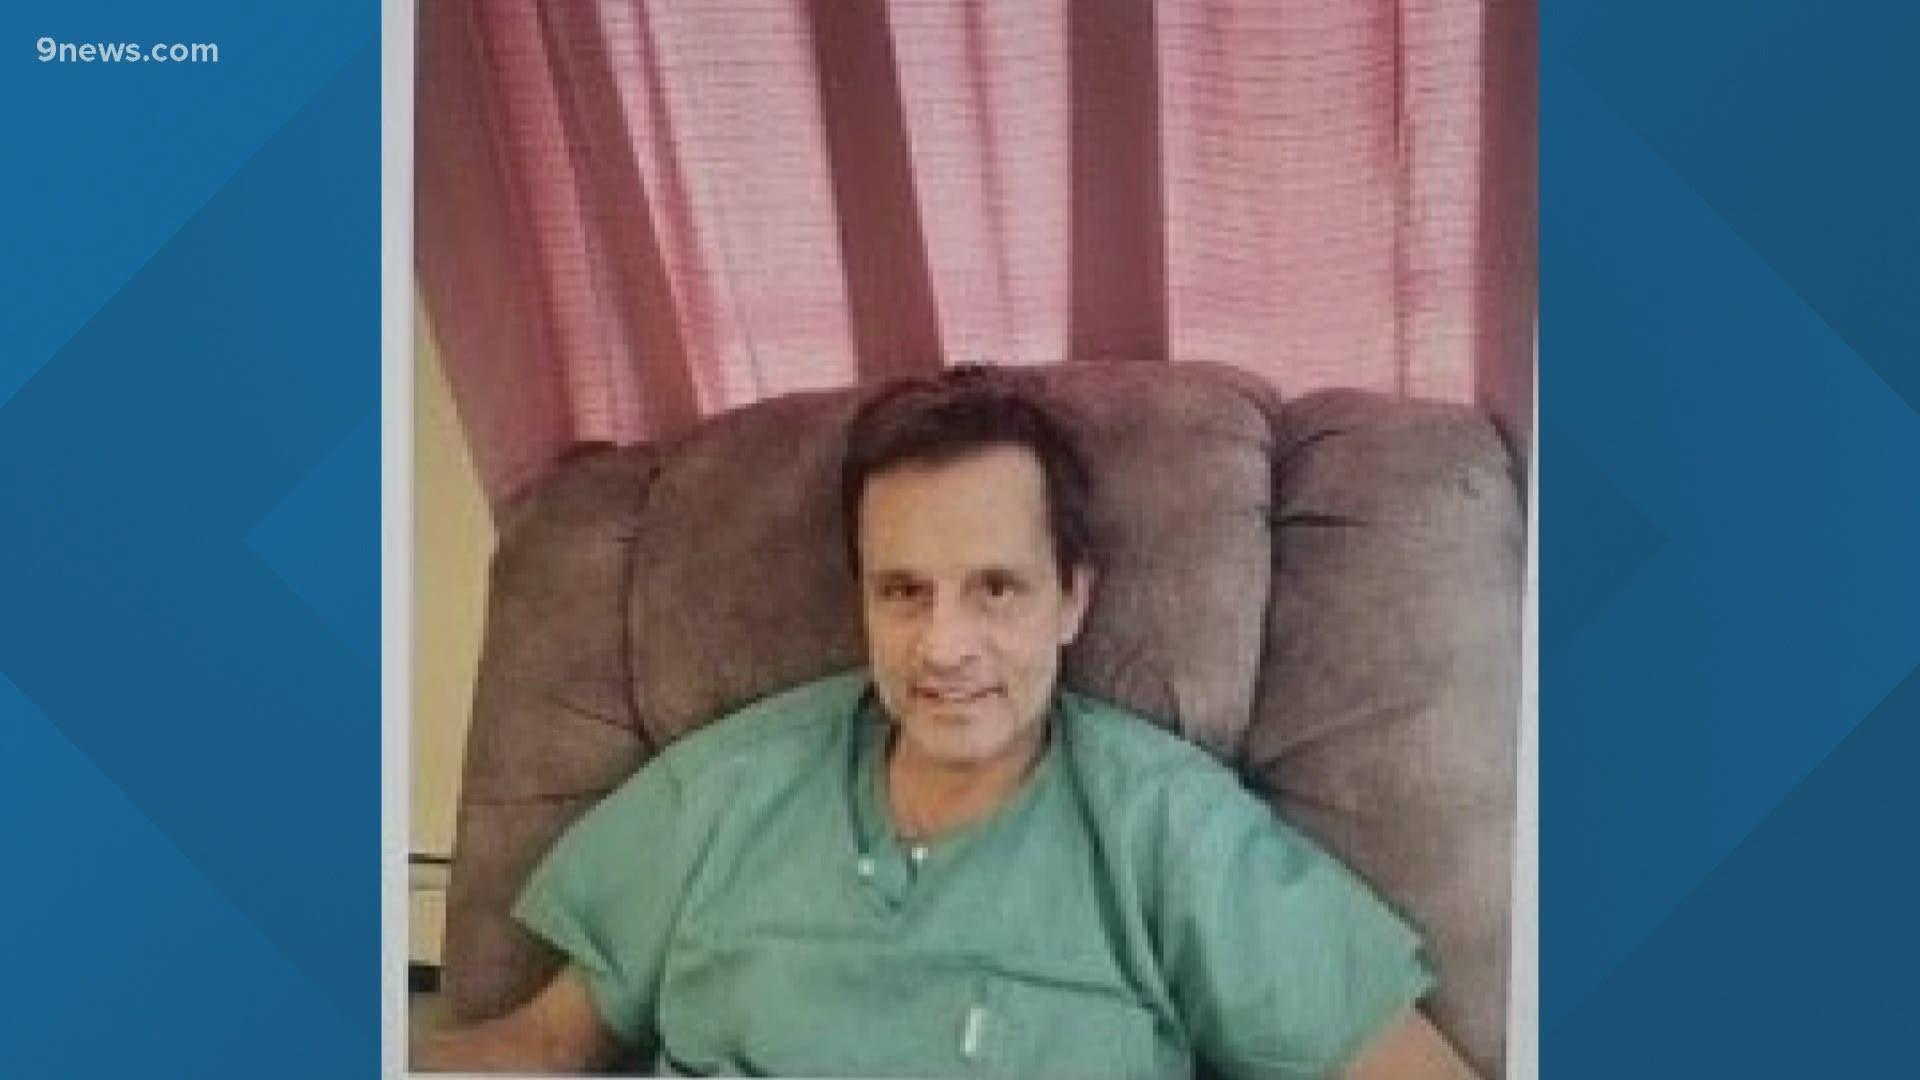 They say he was last seen Thursday when he wandered away from a care facility in Castle Rock  and may have gotten a ride from someone.